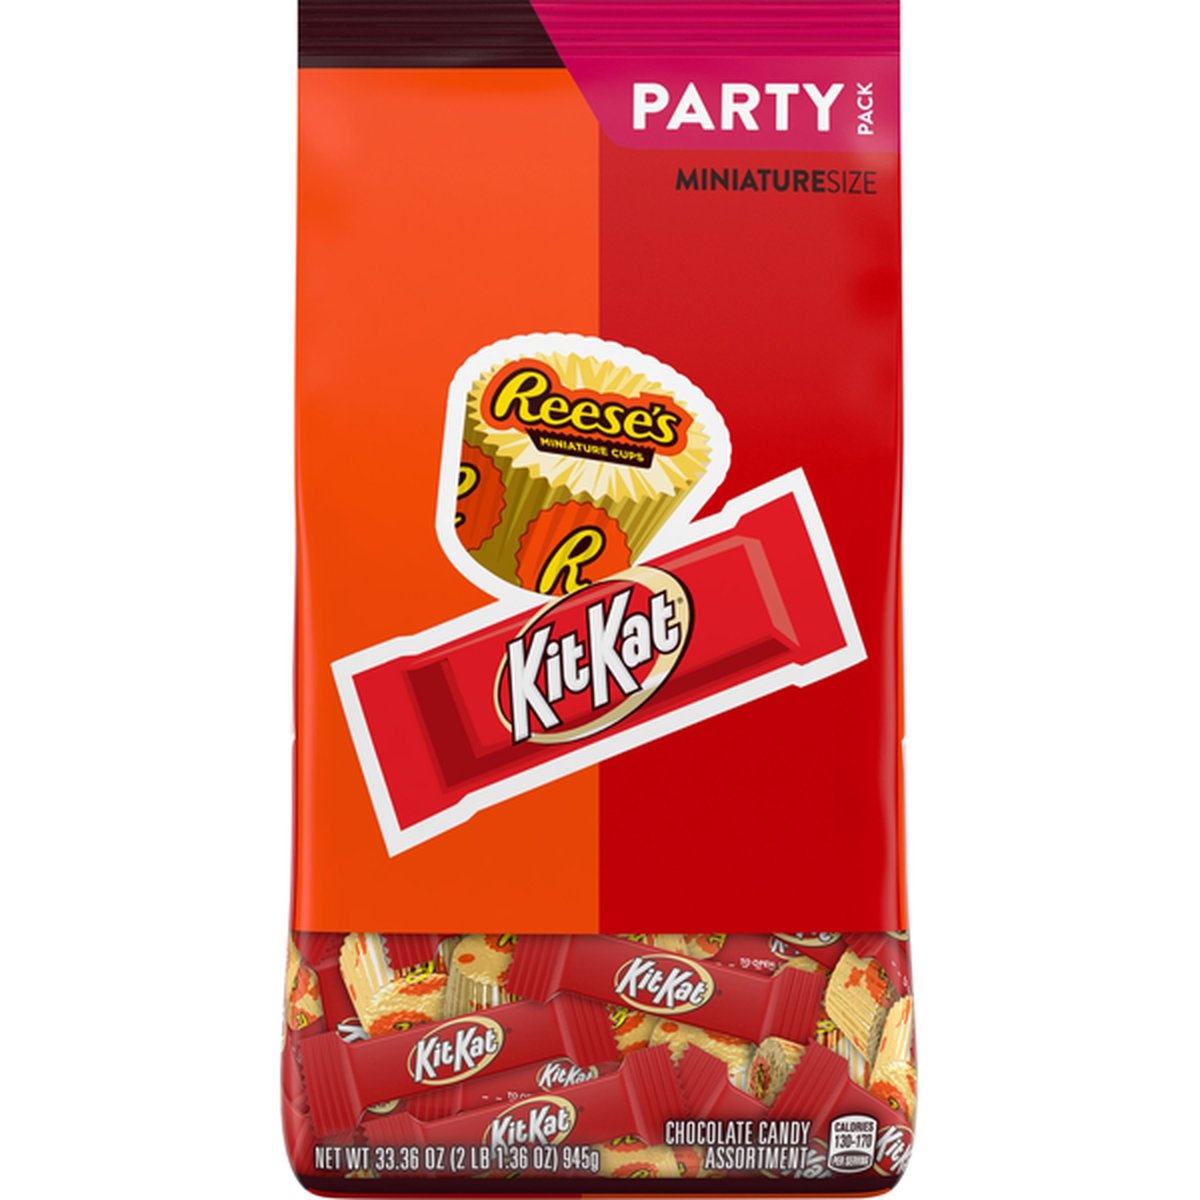 slide 1 of 1, Hershey Chocolate Candy, Assortment, Miniature Size, Party Pack, 33.36 oz